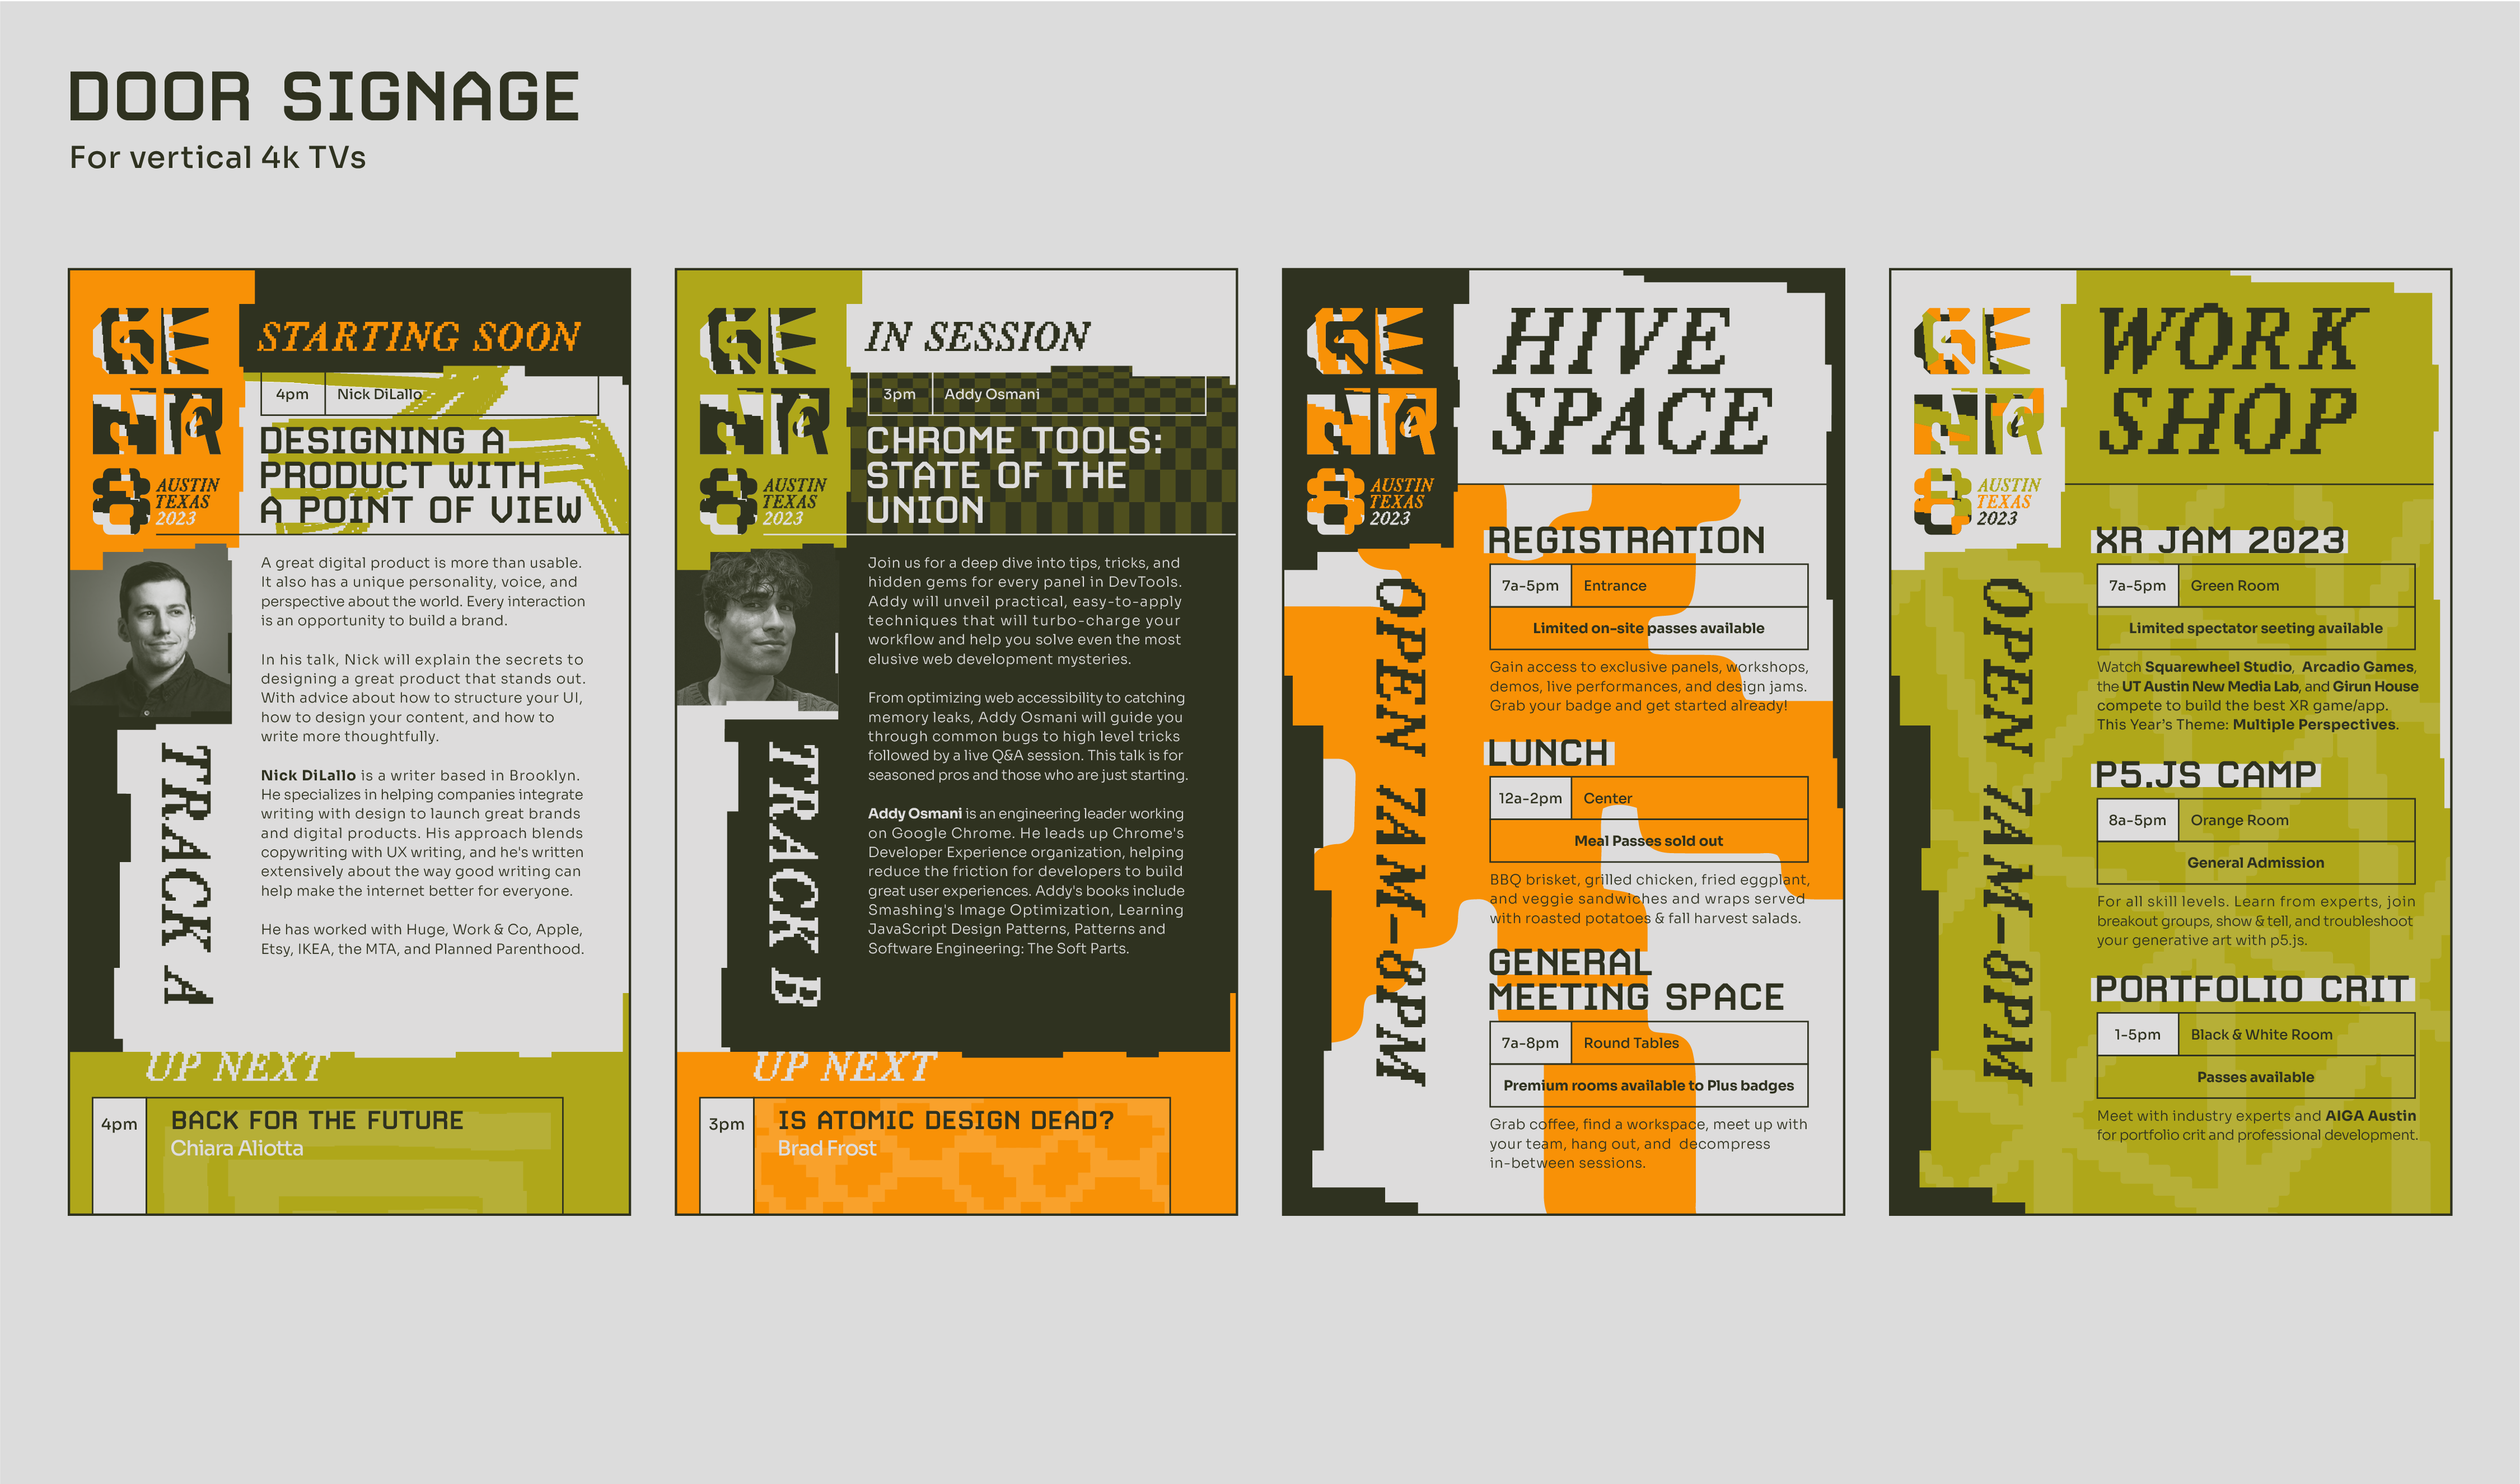 "Door Signage- For vertical 4k TVs"- Signage examples for Track A, B, Hive Space, and Work Shop.